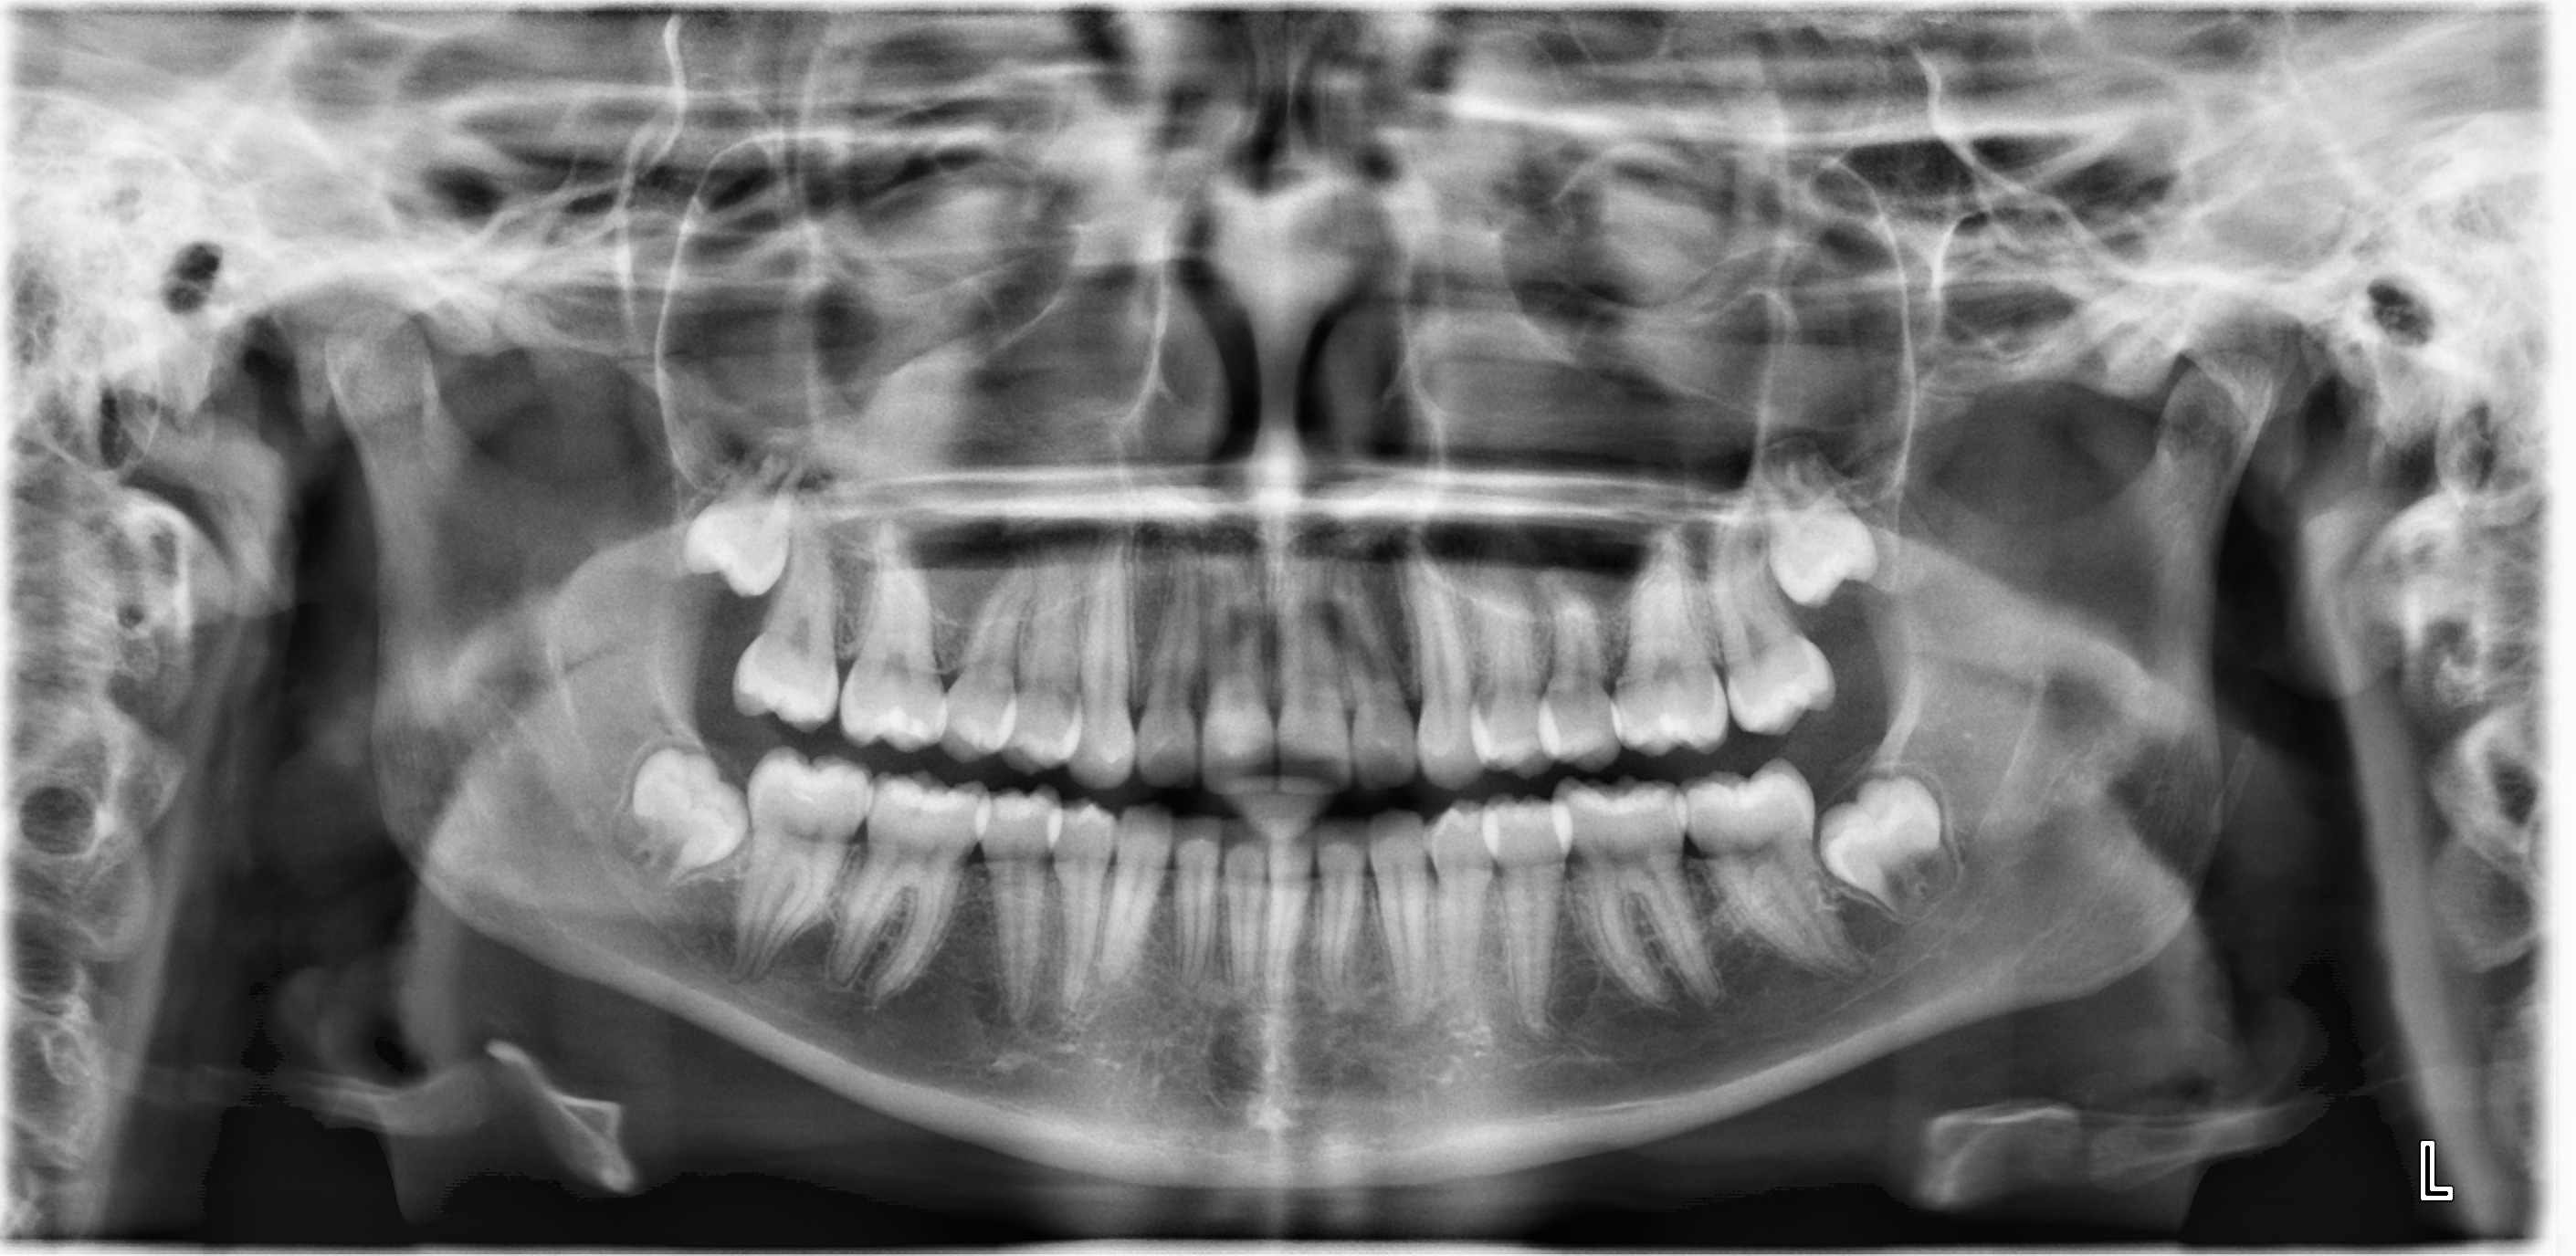 Lead Aprons and Thyroid Collars No Longer Needed for Dental X-rays